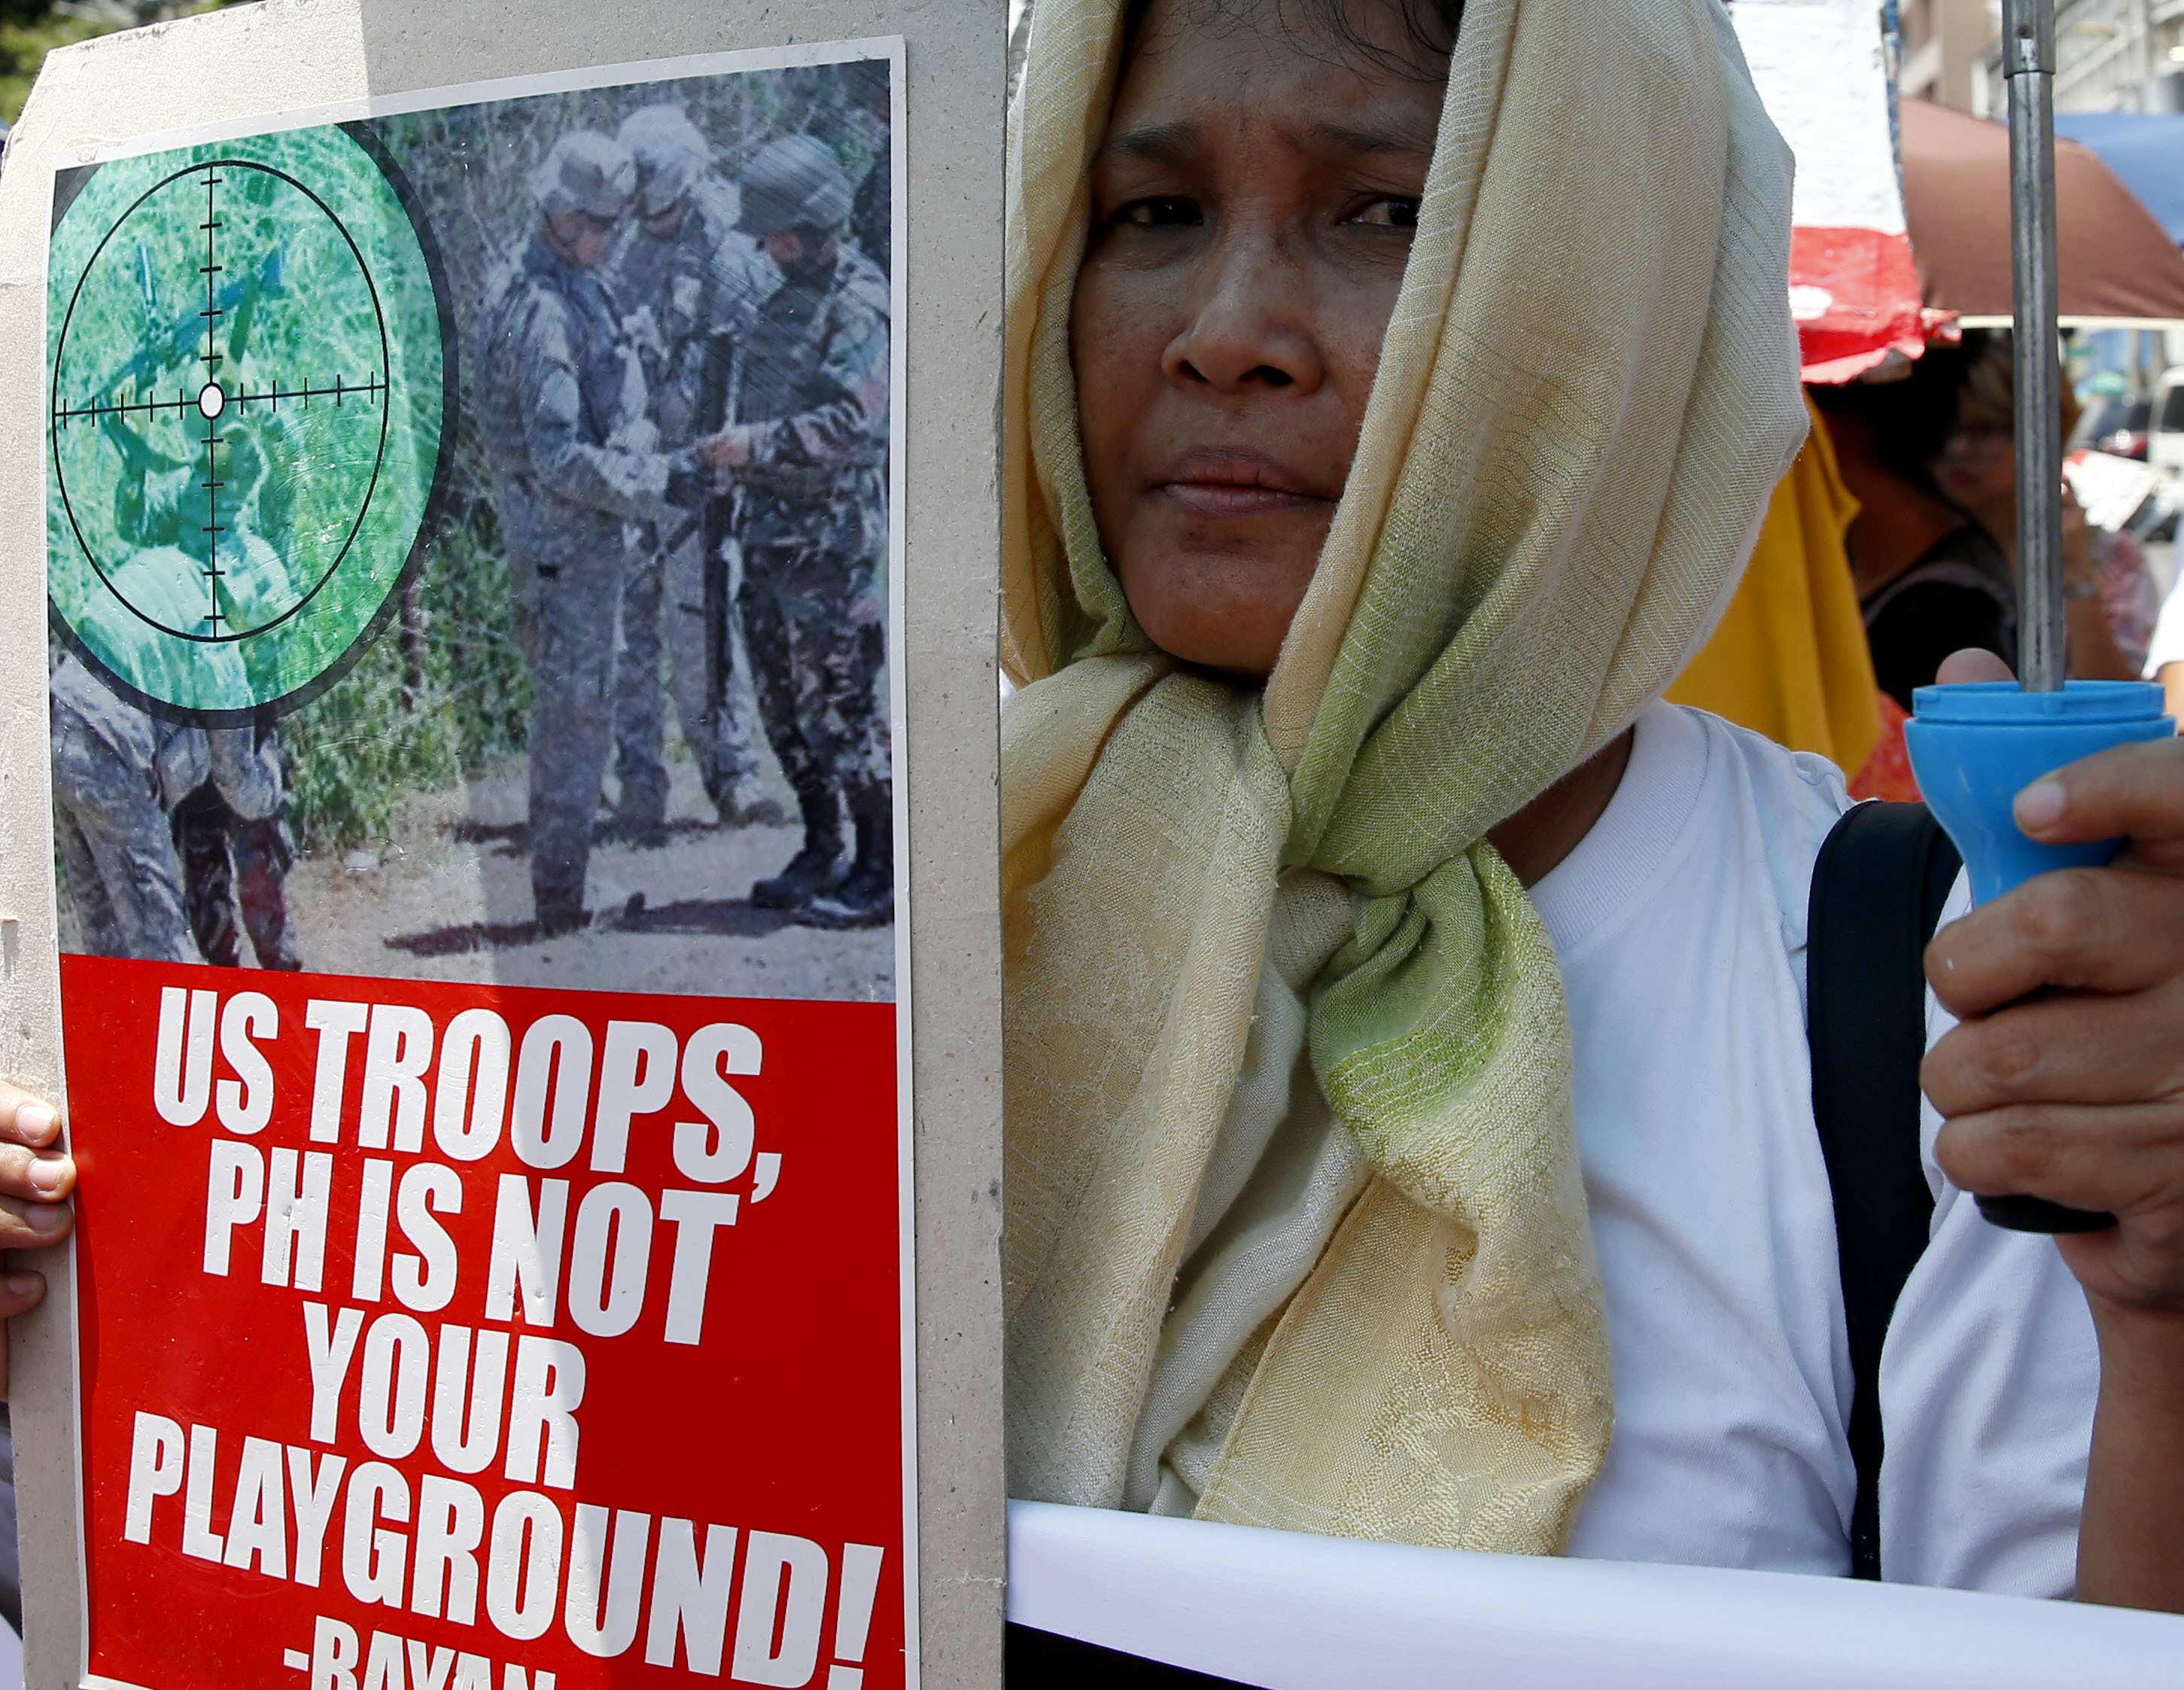 A protester holds a placard during a rally near the U.S. Embassy to denounce the U.S. military's role in the ongoing battle between Government forces and Muslim militants who laid siege to Marawi city in southern Philippines for three weeks now Monday, June 12, 2017 in Manila, Philippines. The protesters also denounced President Rodrigo Duterte's declaration of Martial Law in the whole region of Mindanao in southern Philippines.(AP Photo/Bullit Marquez)